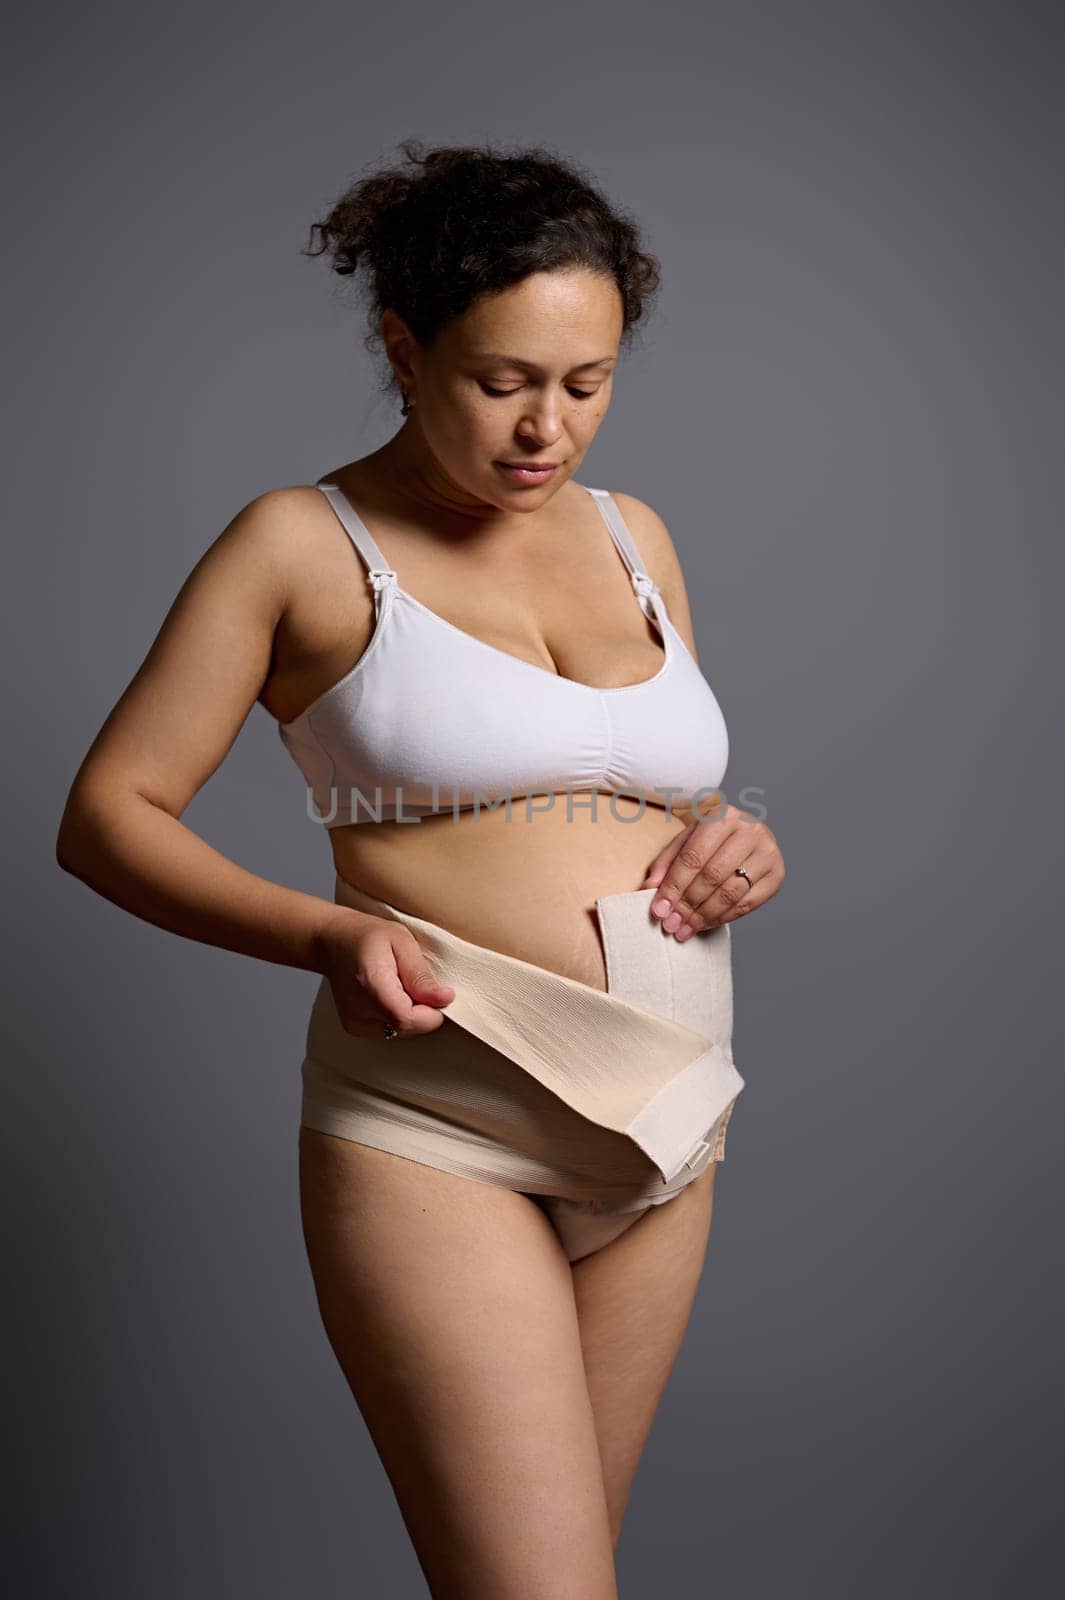 Vertical portrait of Latin American middle aged naked woman, young mother in underwear after c-section, wearing elastic bandage, isolated over gray studio background. Postpartum. Post pregnancy time